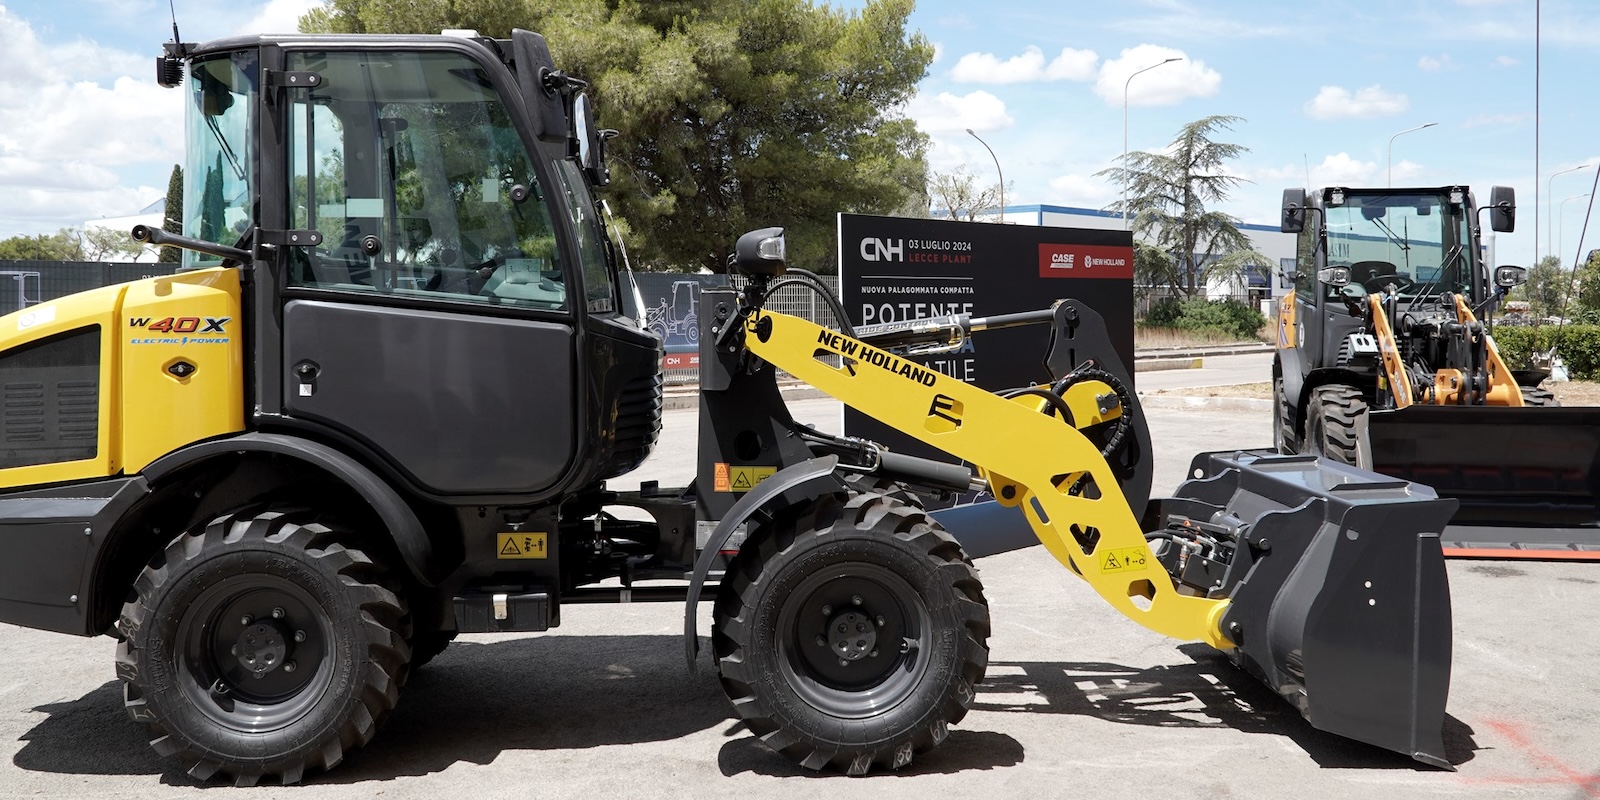 CNH inaugurates electric compact wheel loader production line